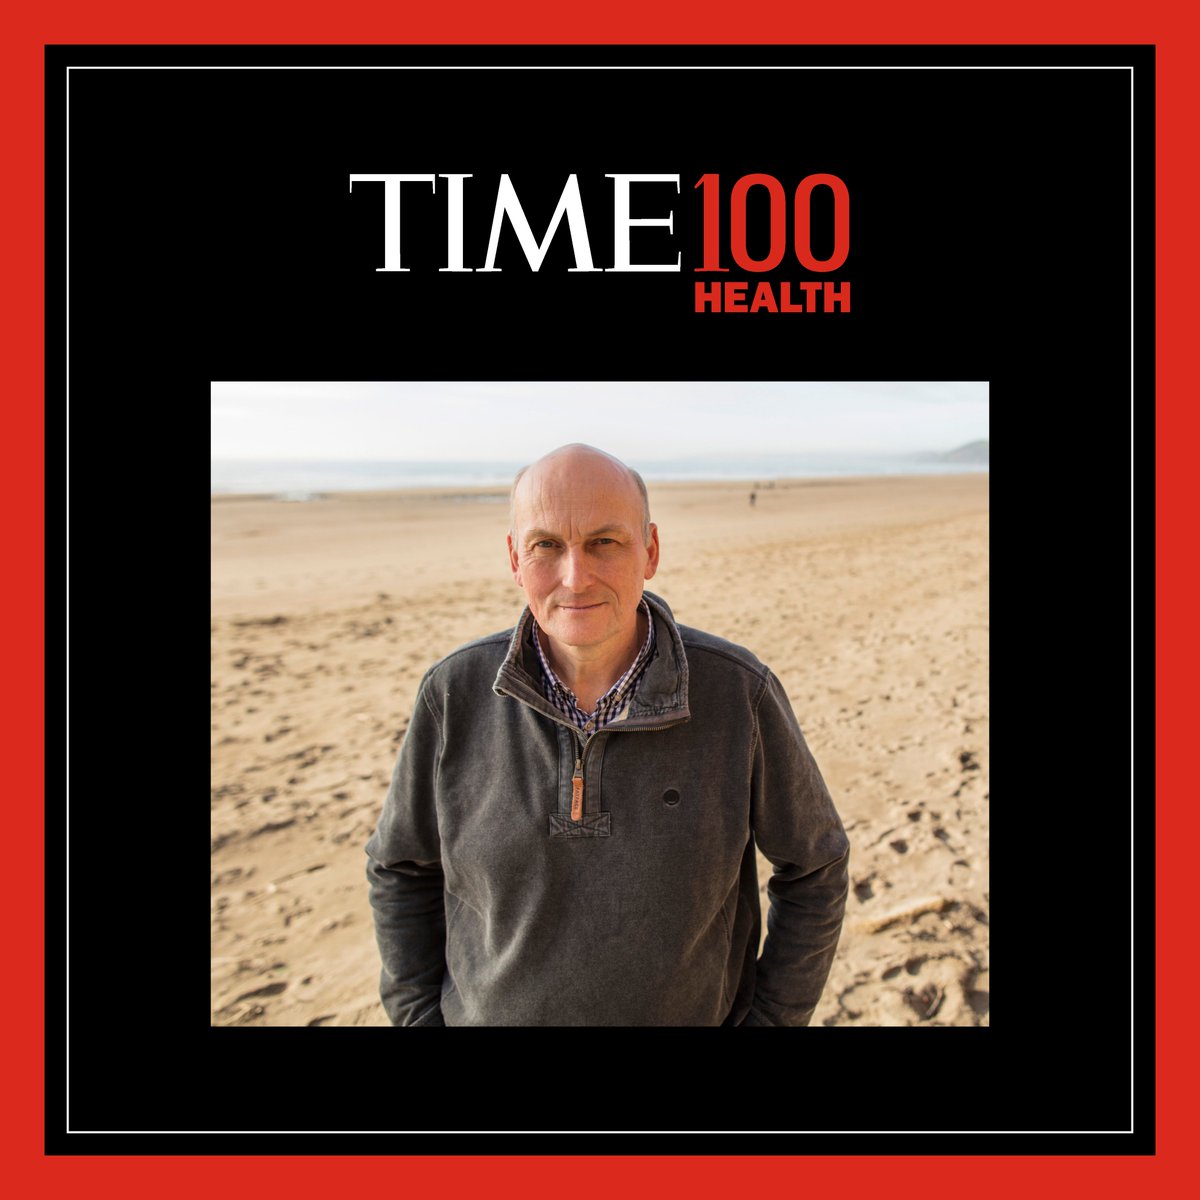 Professor Richard Thompson OBE FRS, Head of our International Marine Litter Research Unit, has been named in @TIME's list of the 100 Most Influential People in global health. plymouth.ac.uk/news/microplas… #TIME100HEALTH